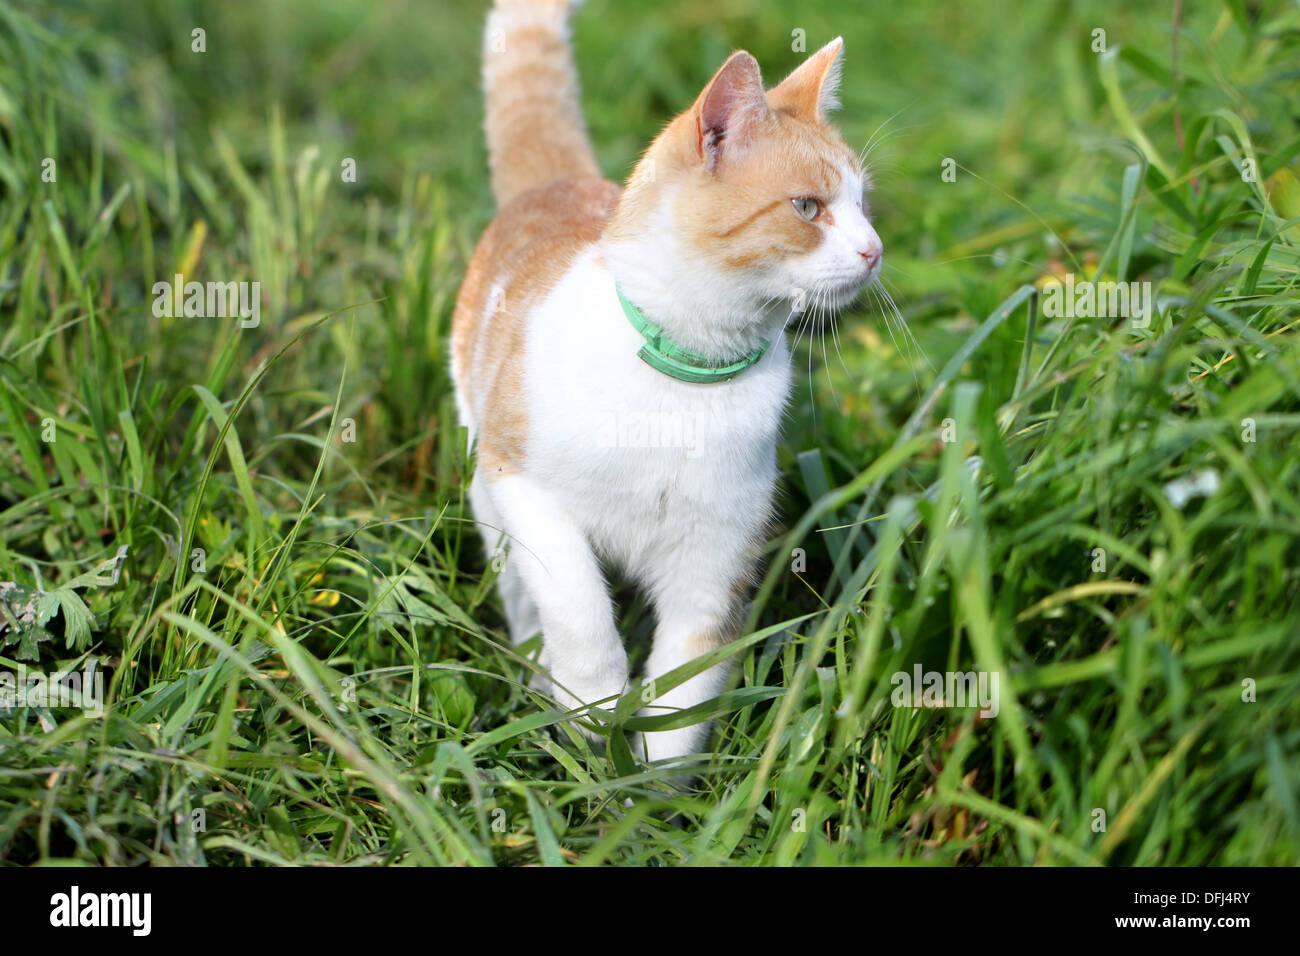 Cat standing in green grass Stock Photo